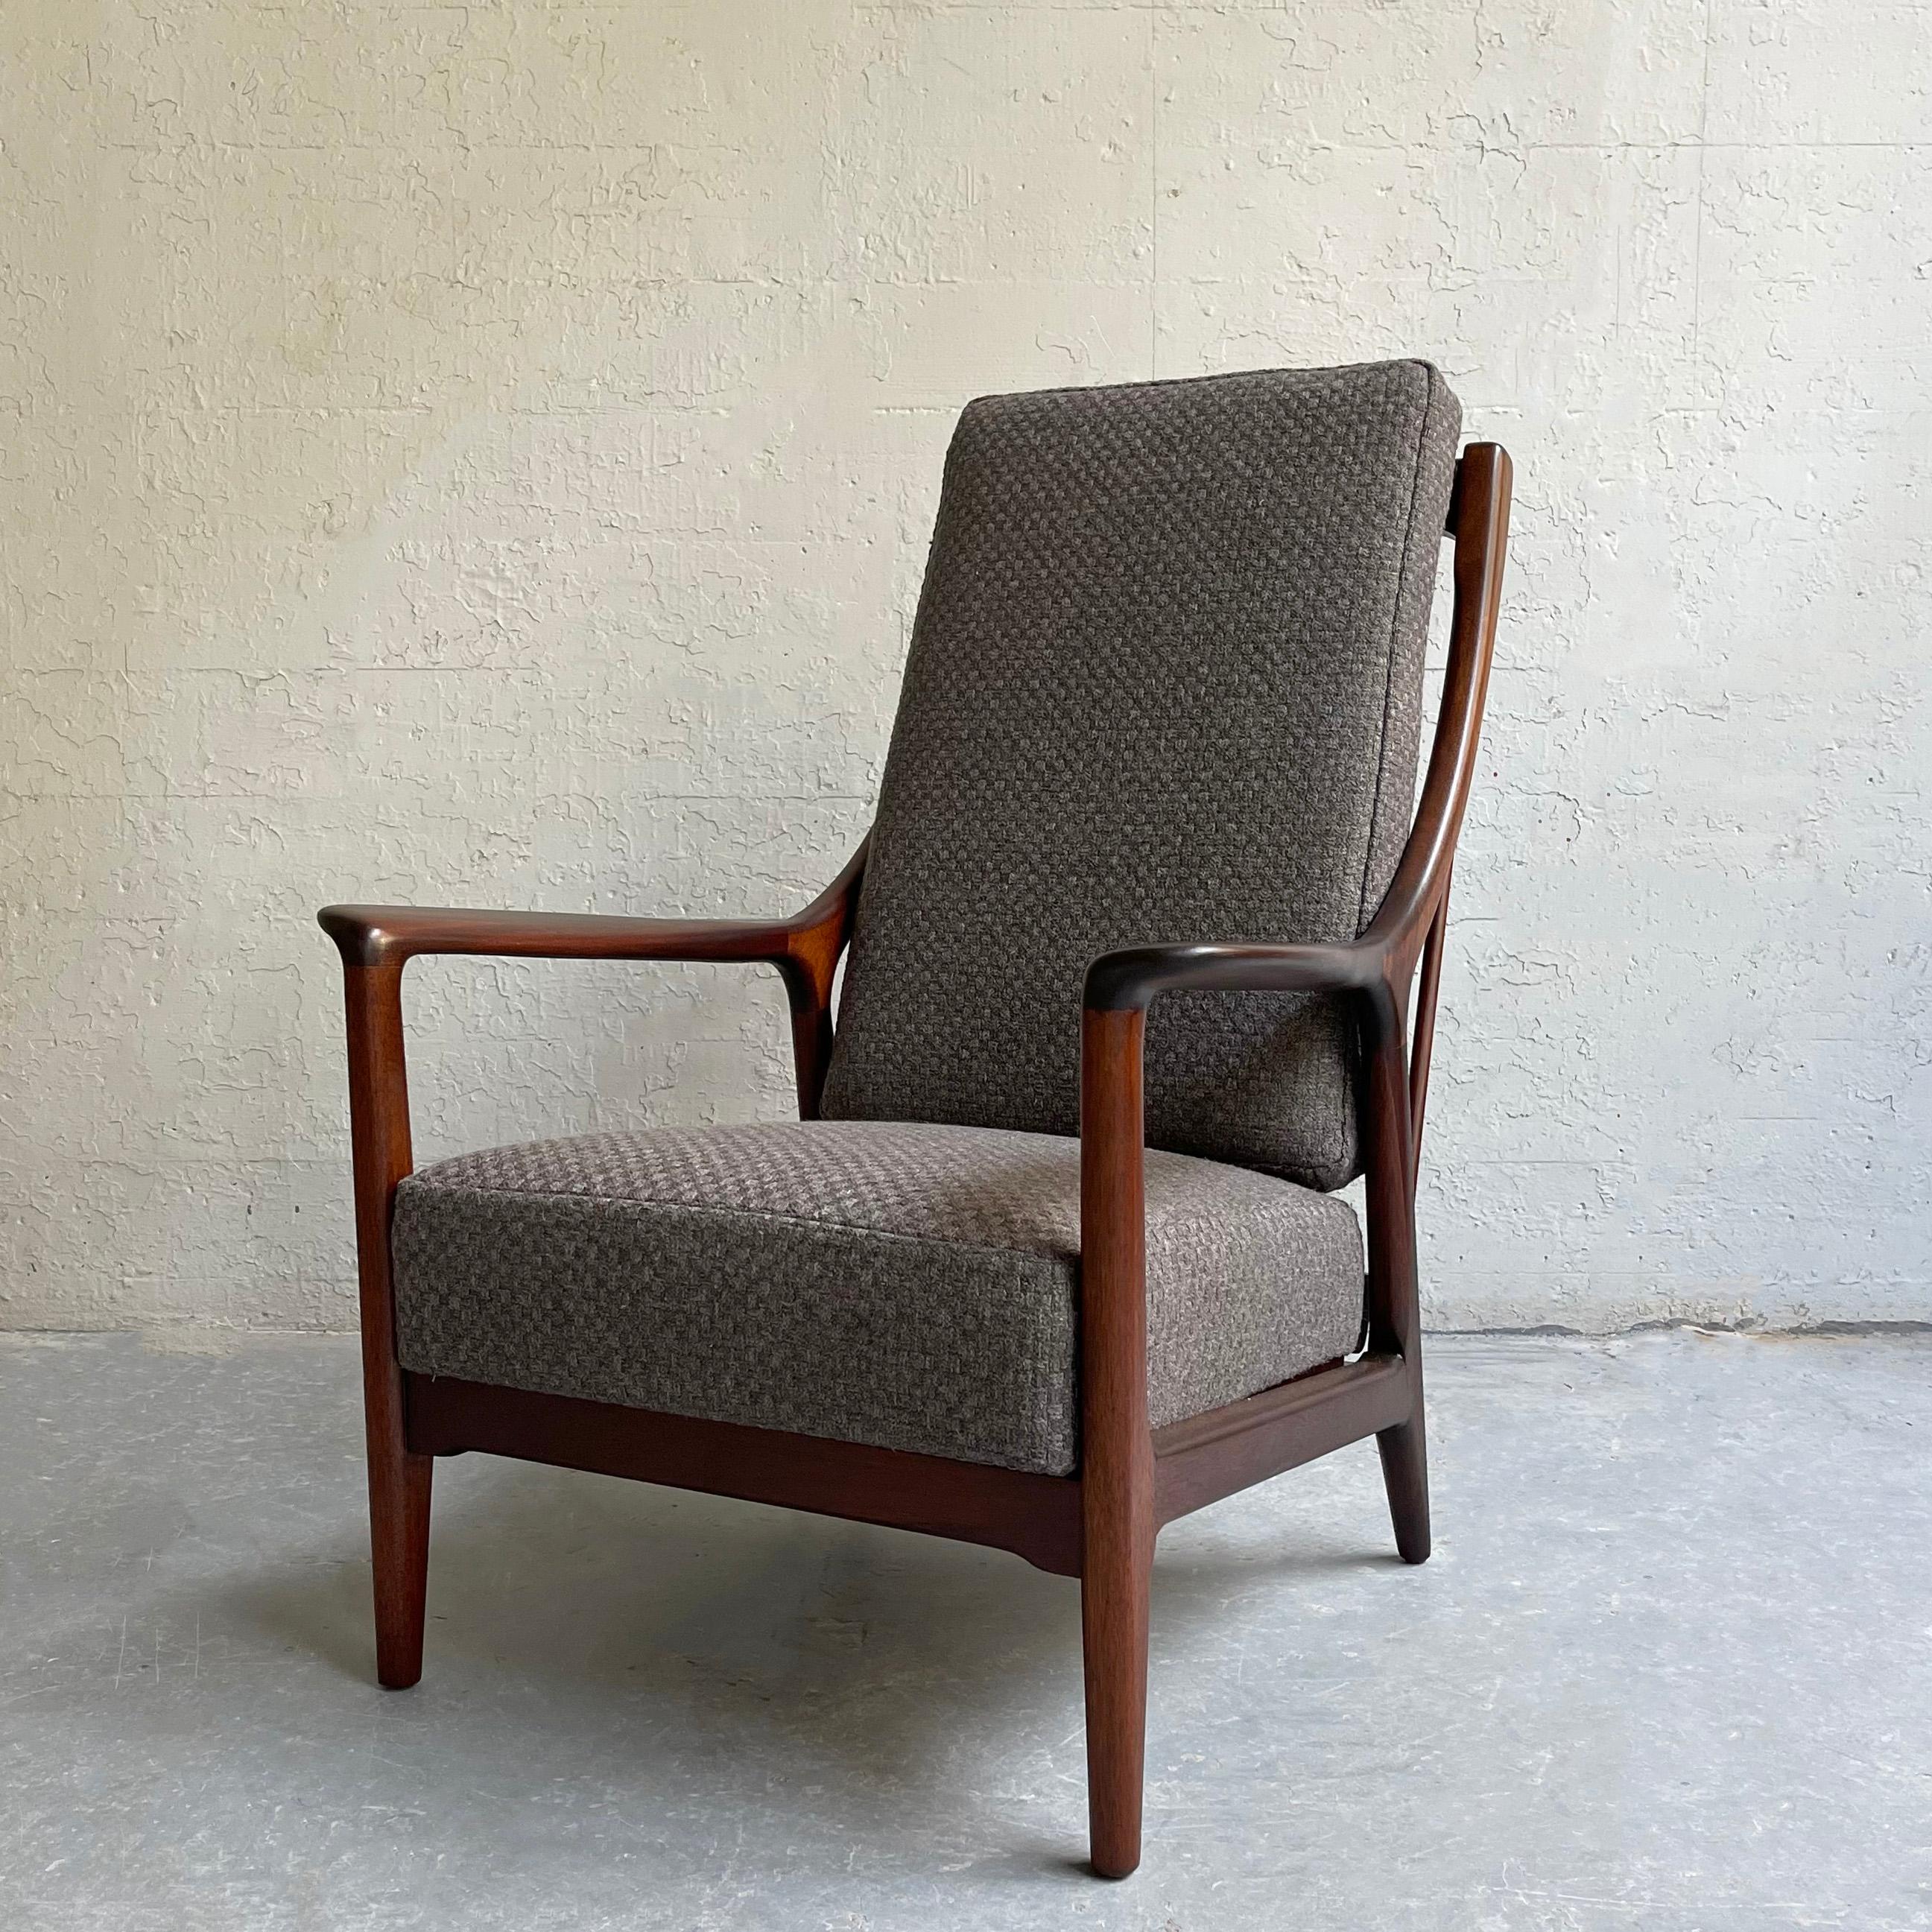 Stunning, Mid-Century Modern, reclining lounge chair features a elegant, walnut frame that slides from upright to a 3.5